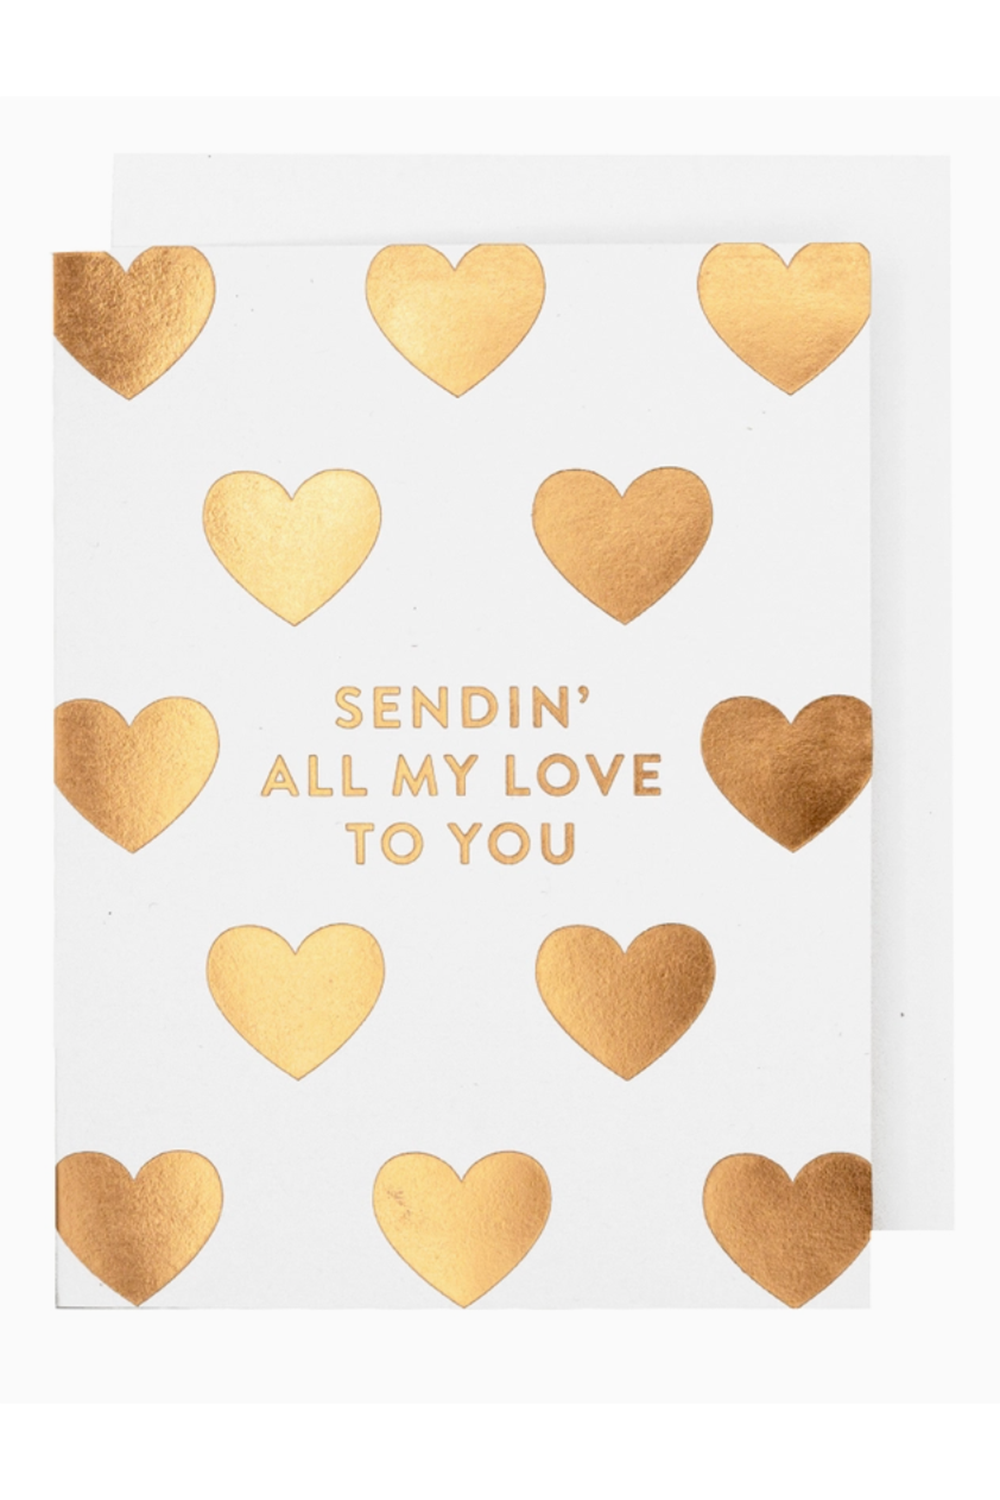 Social Valentine's Day Greeting Card - Sending All My Love